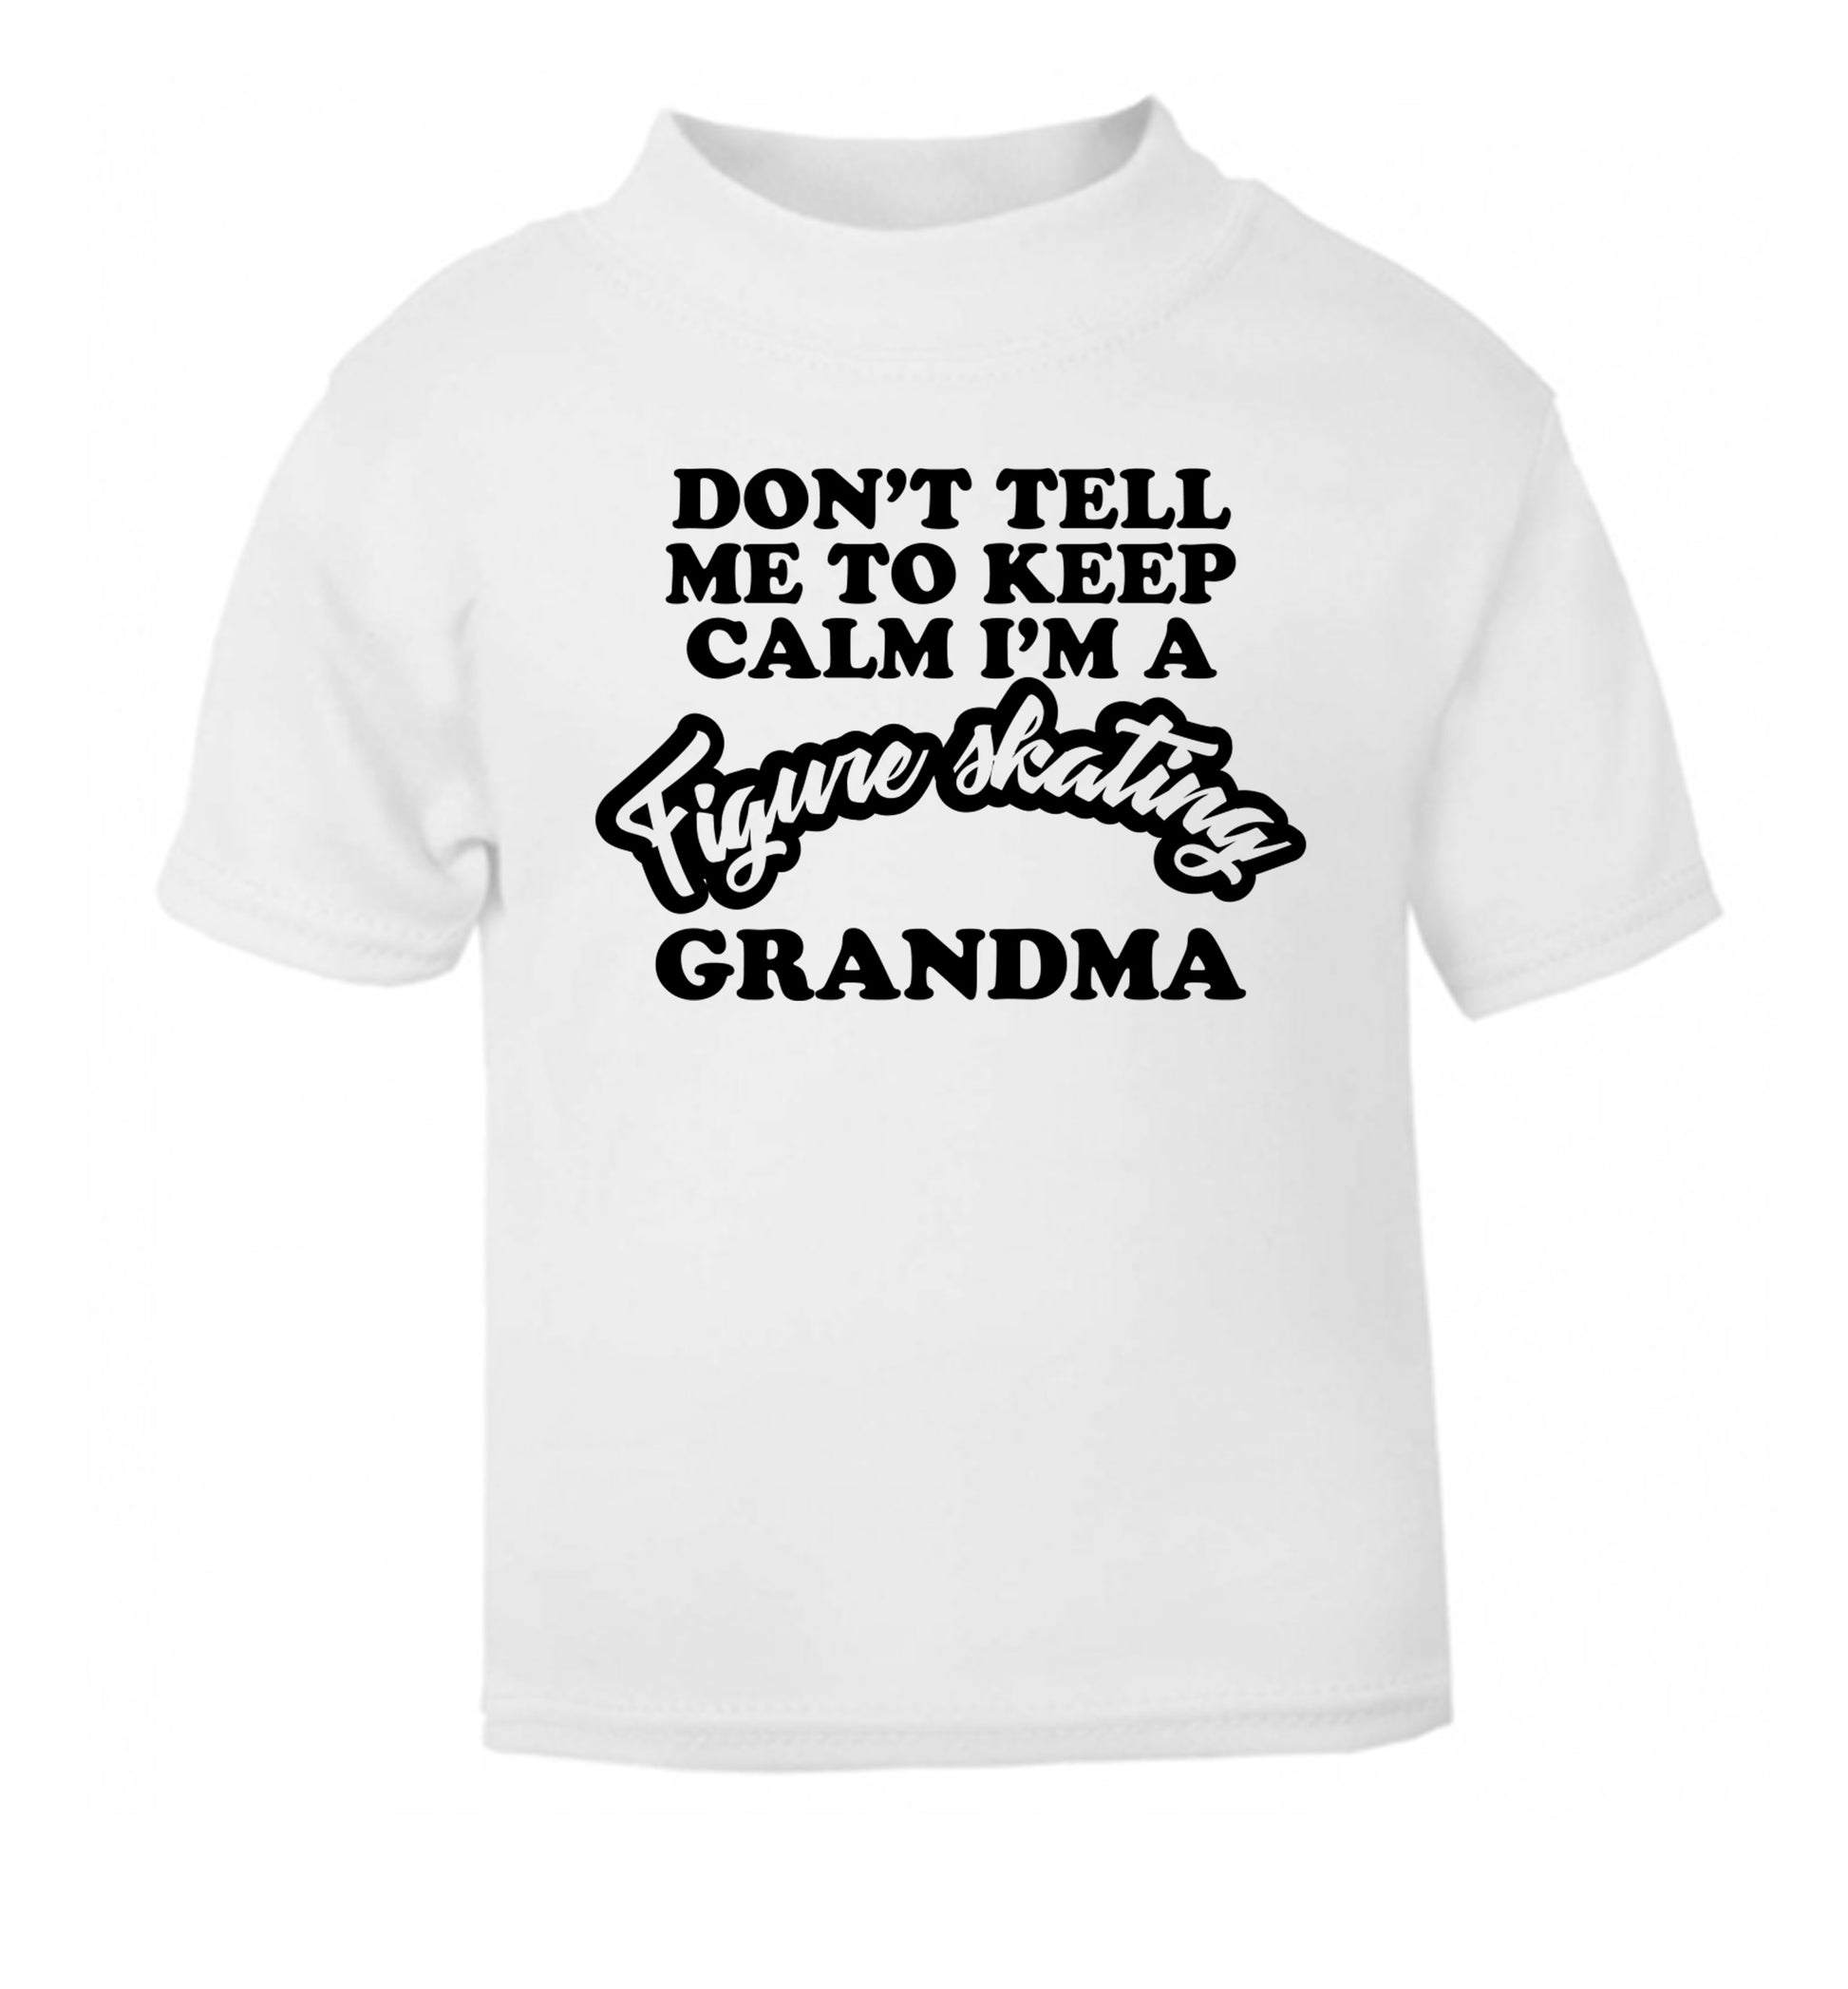 Don't tell me to keep calm I'm a figure skating grandma white Baby Toddler Tshirt 2 Years